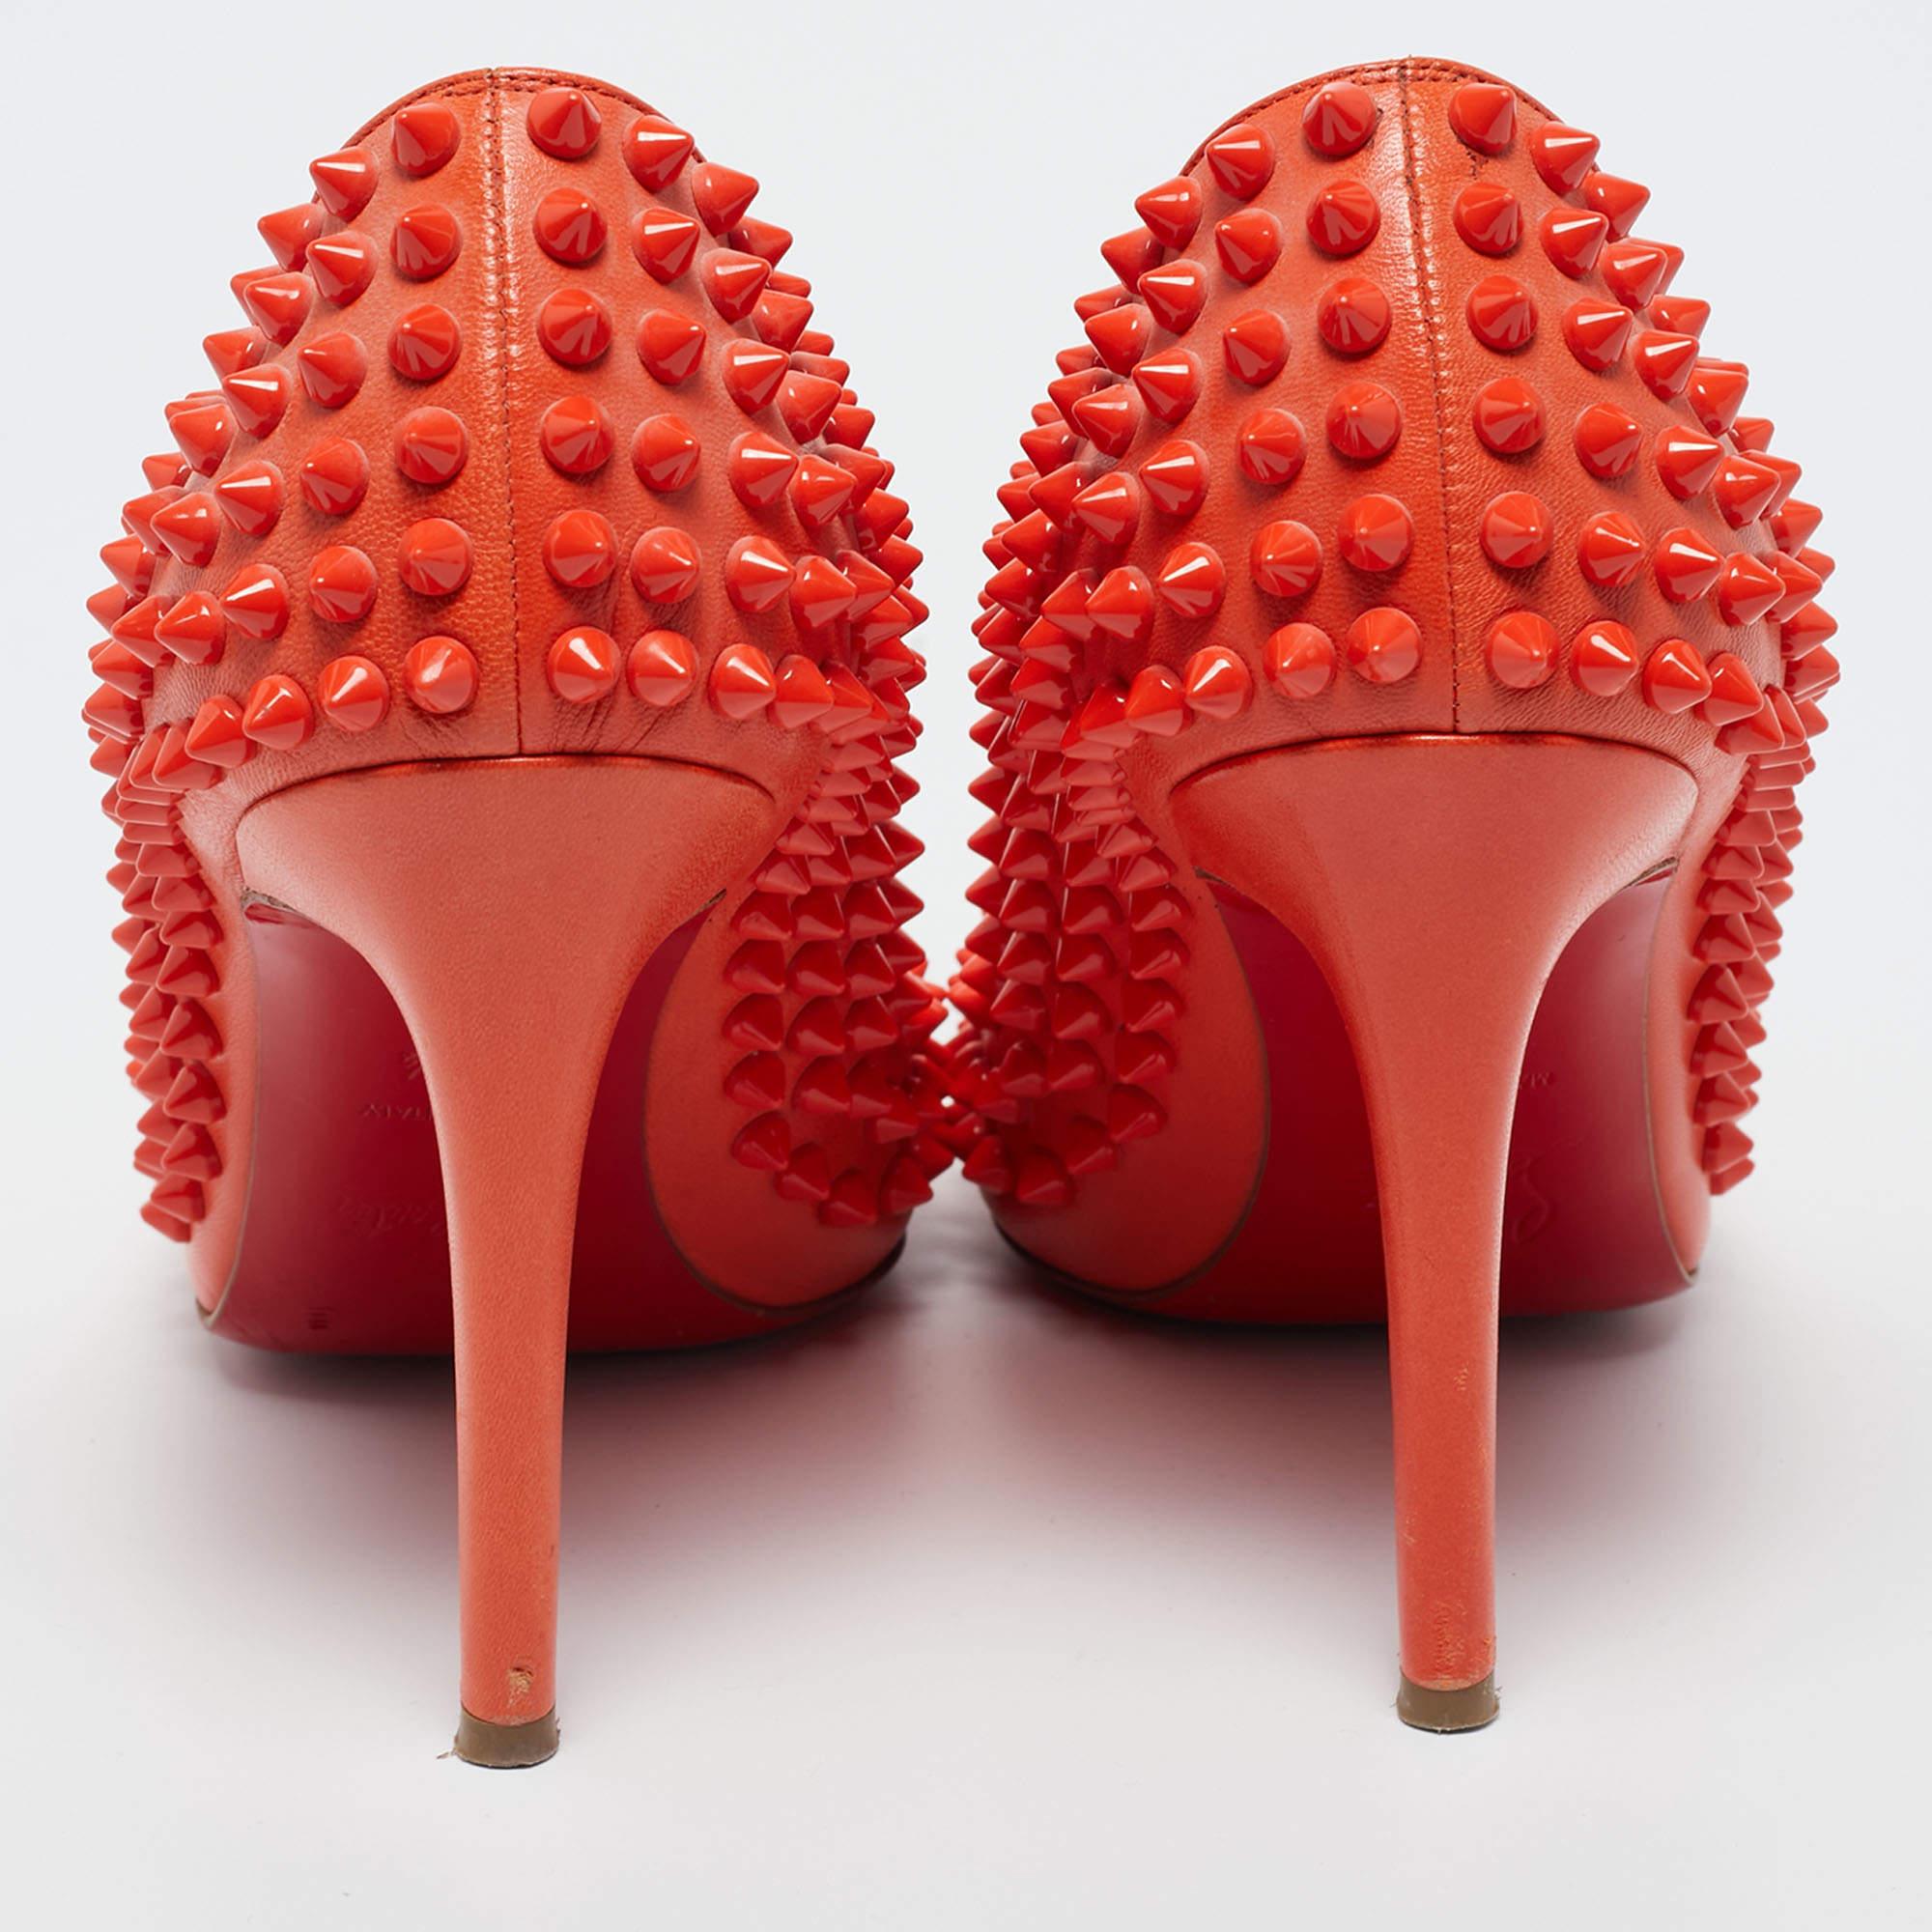 Christian Louboutin Orange Leather Pigalle Spikes Pumps Size 37.5 4